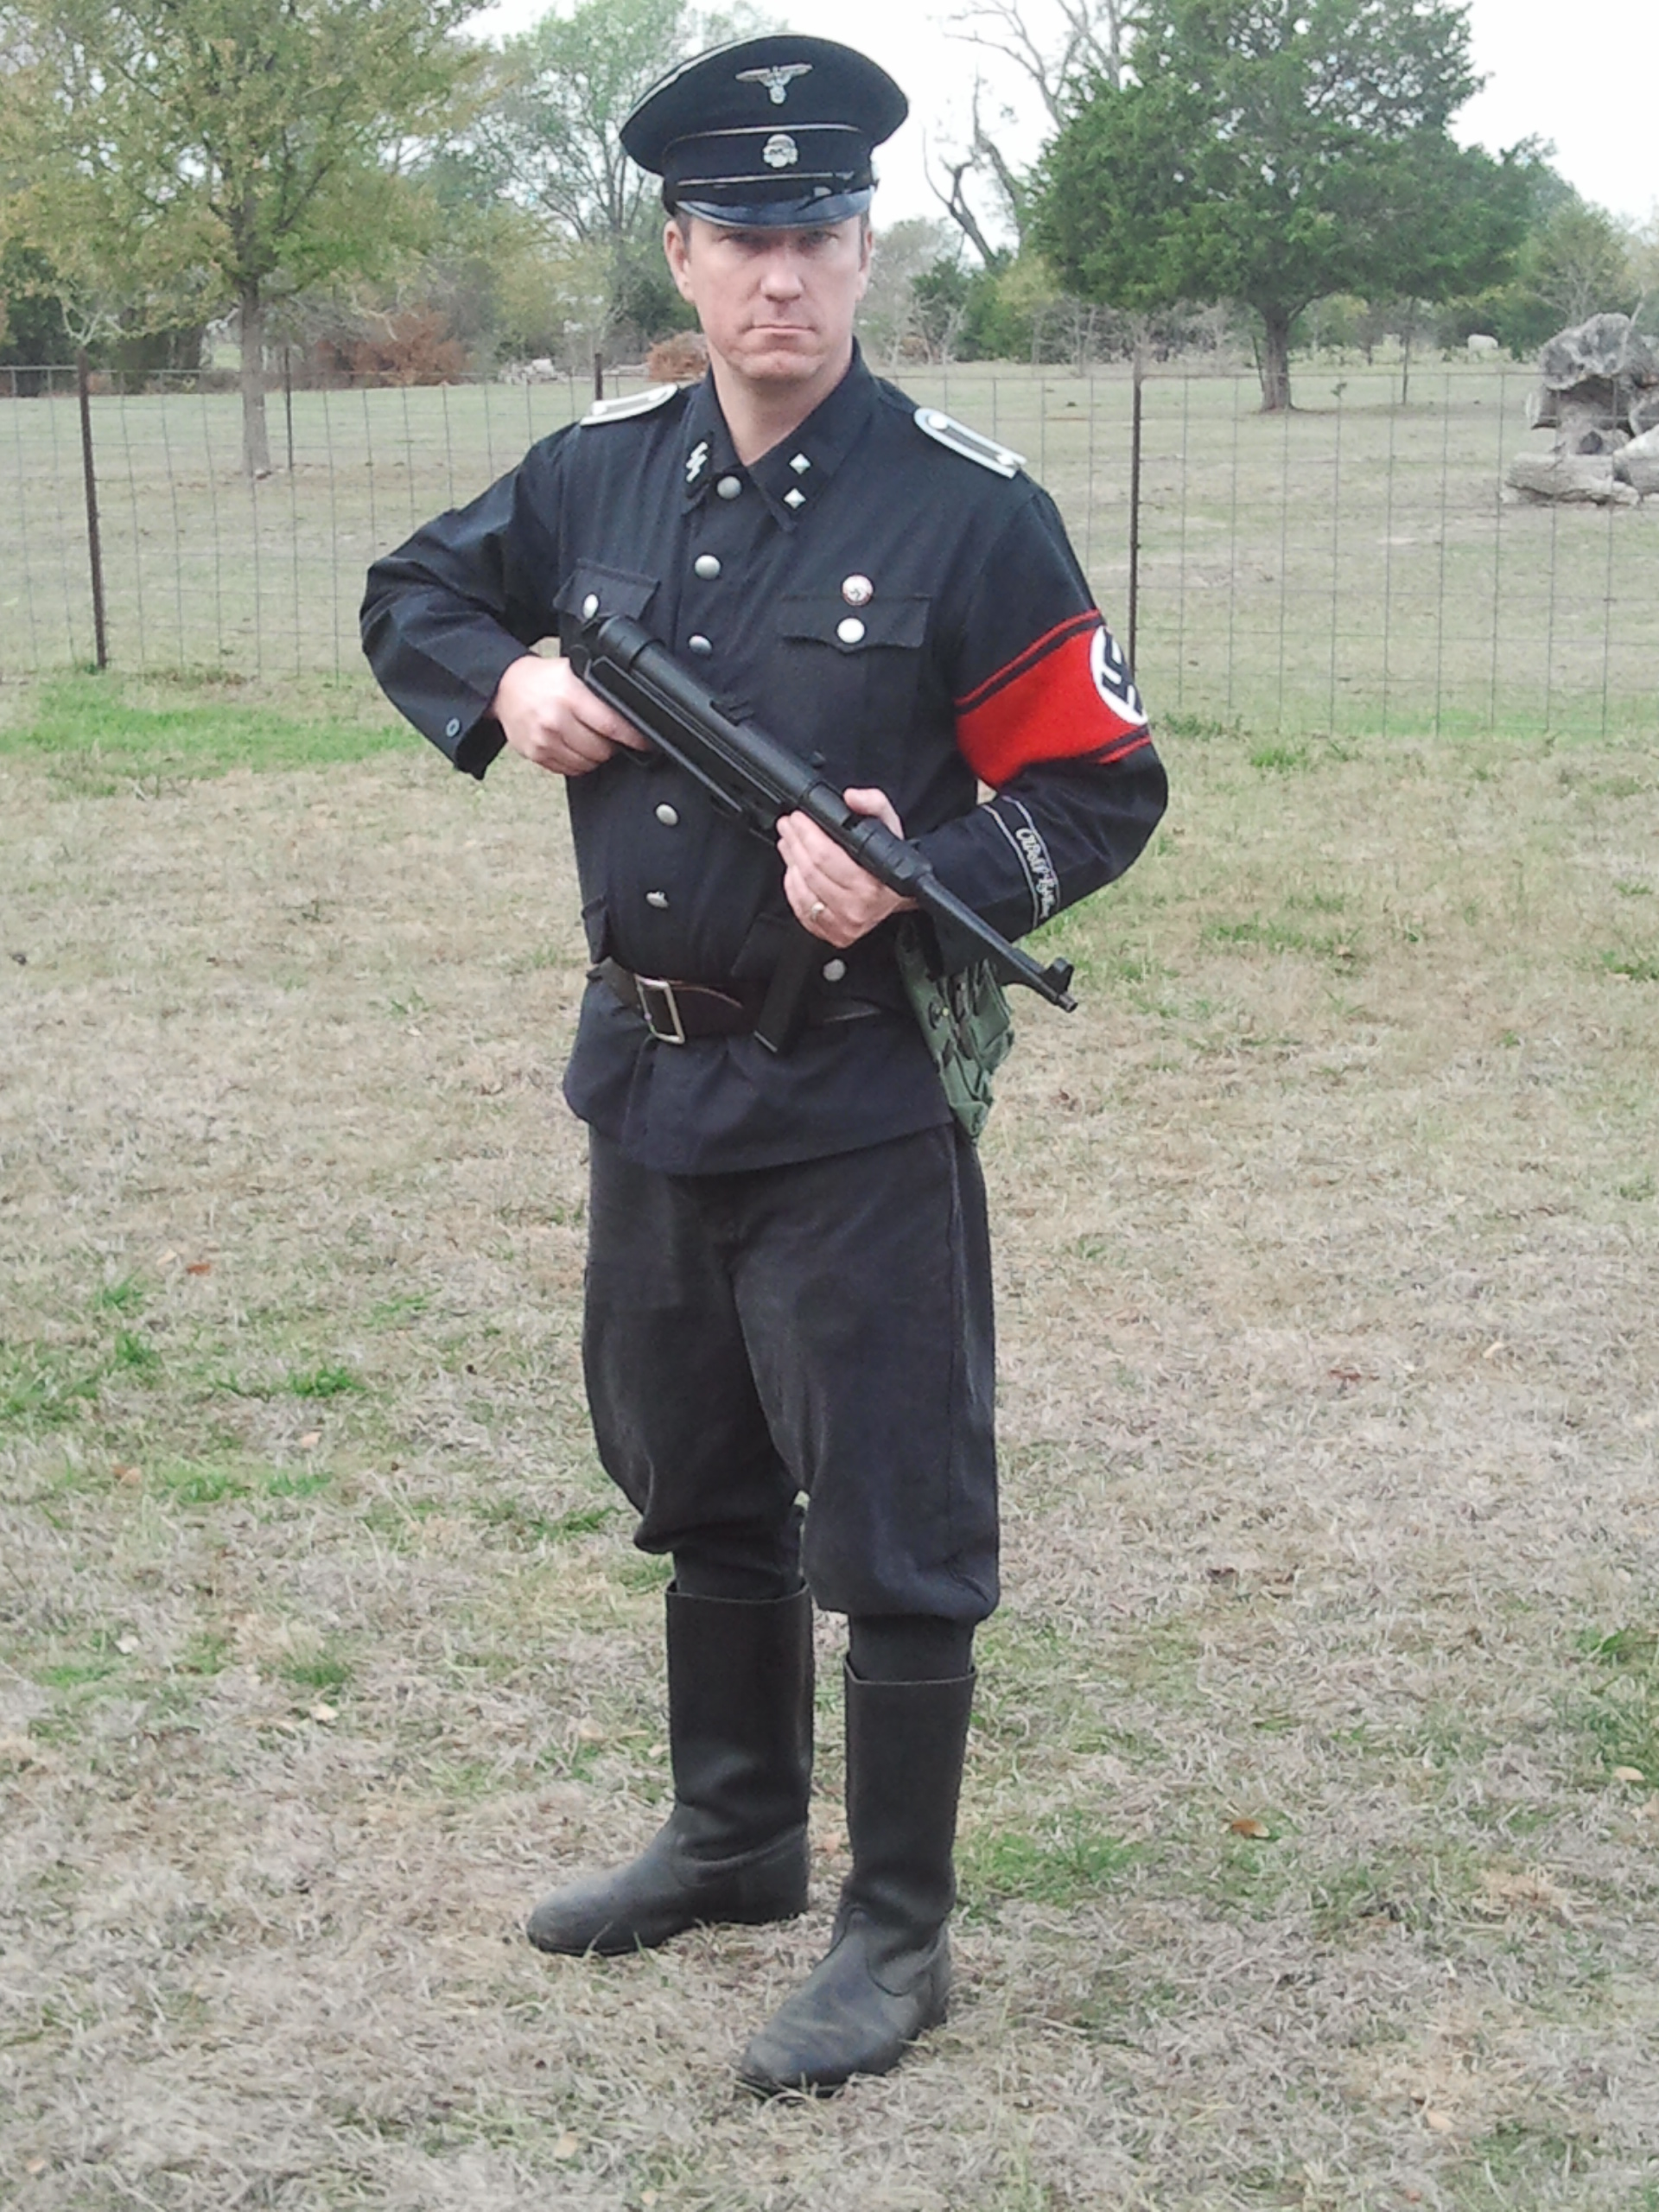 German Soldier from the short film 